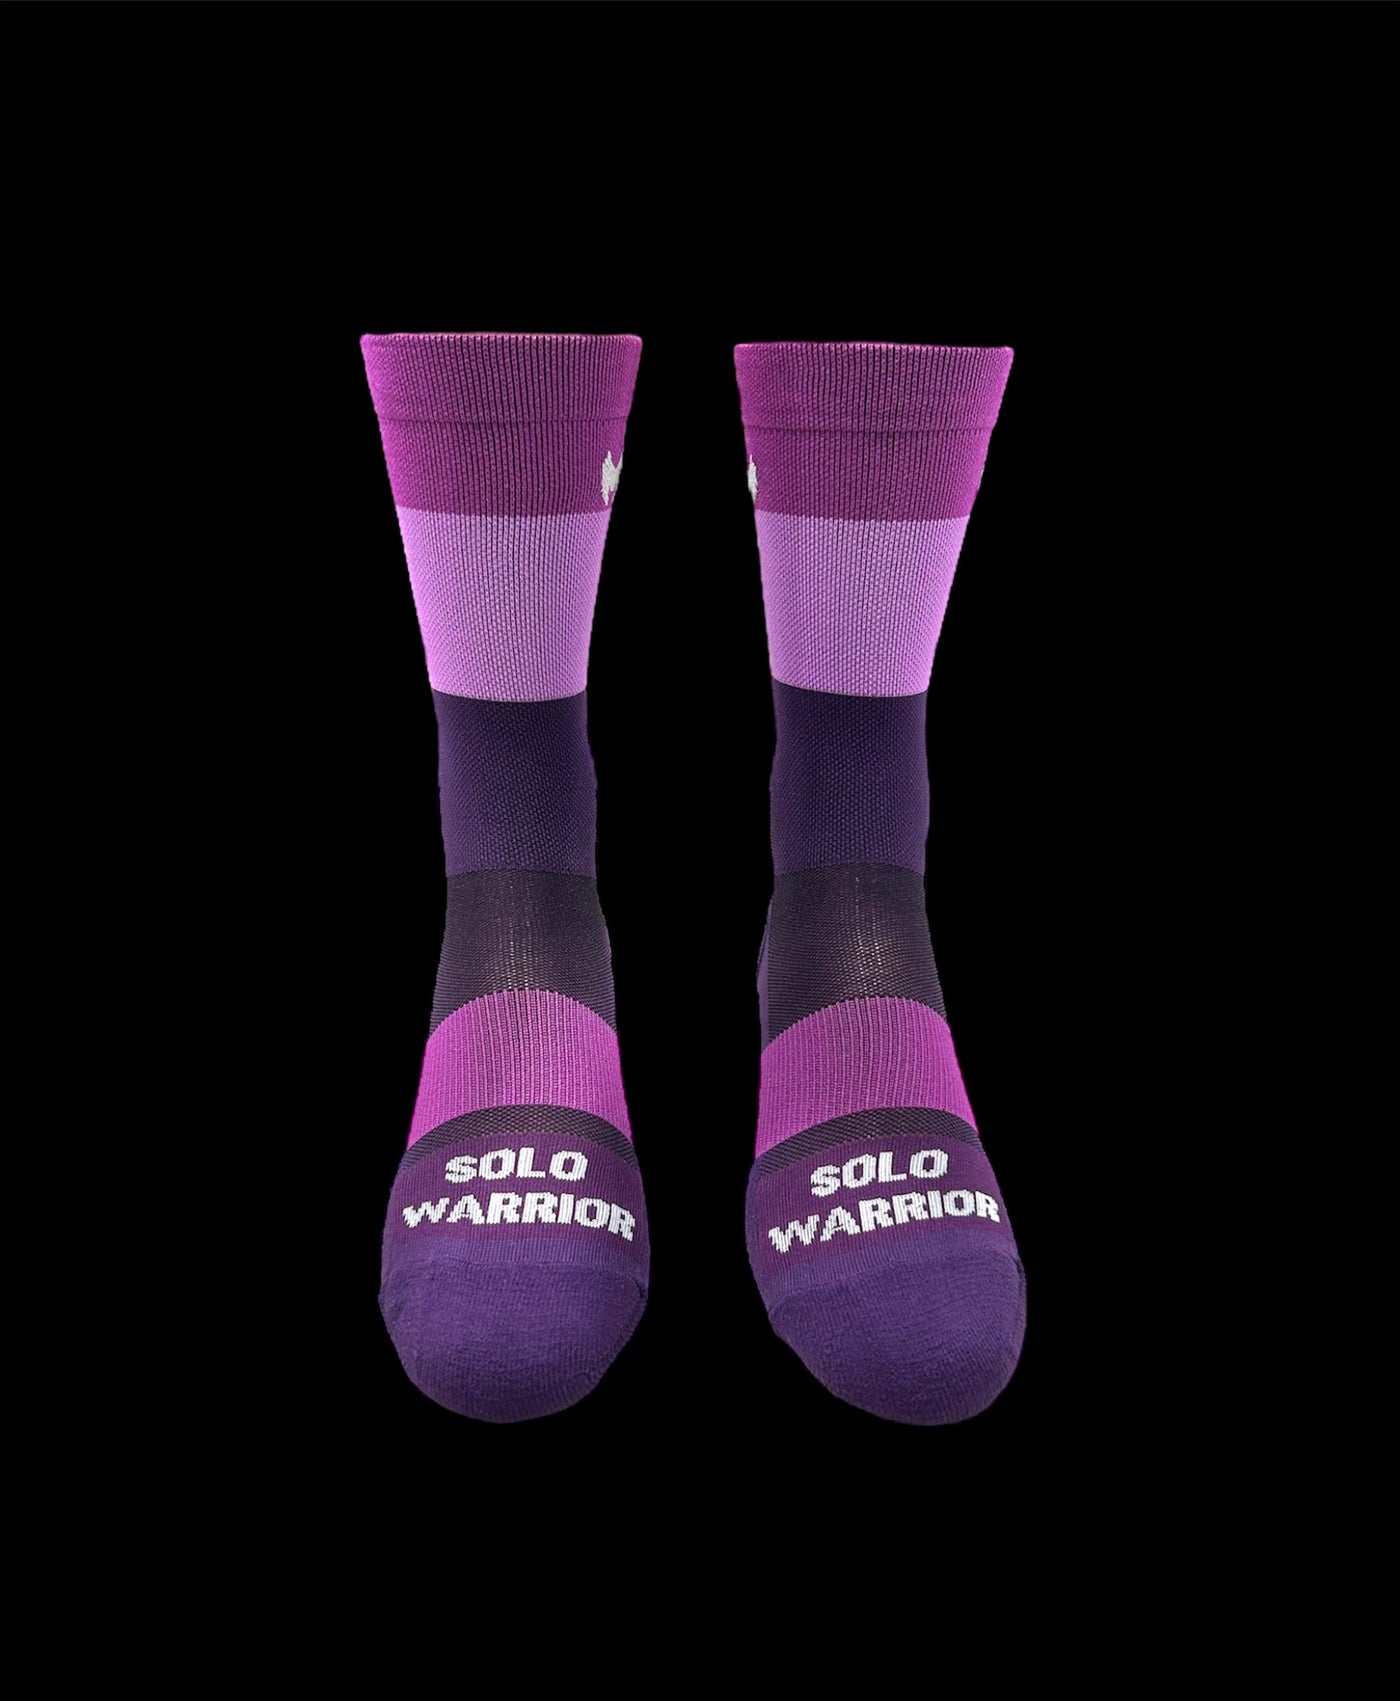 The ”Trio Purple” is a three shades of purple 6" men and women's cycling and running sock with compression.